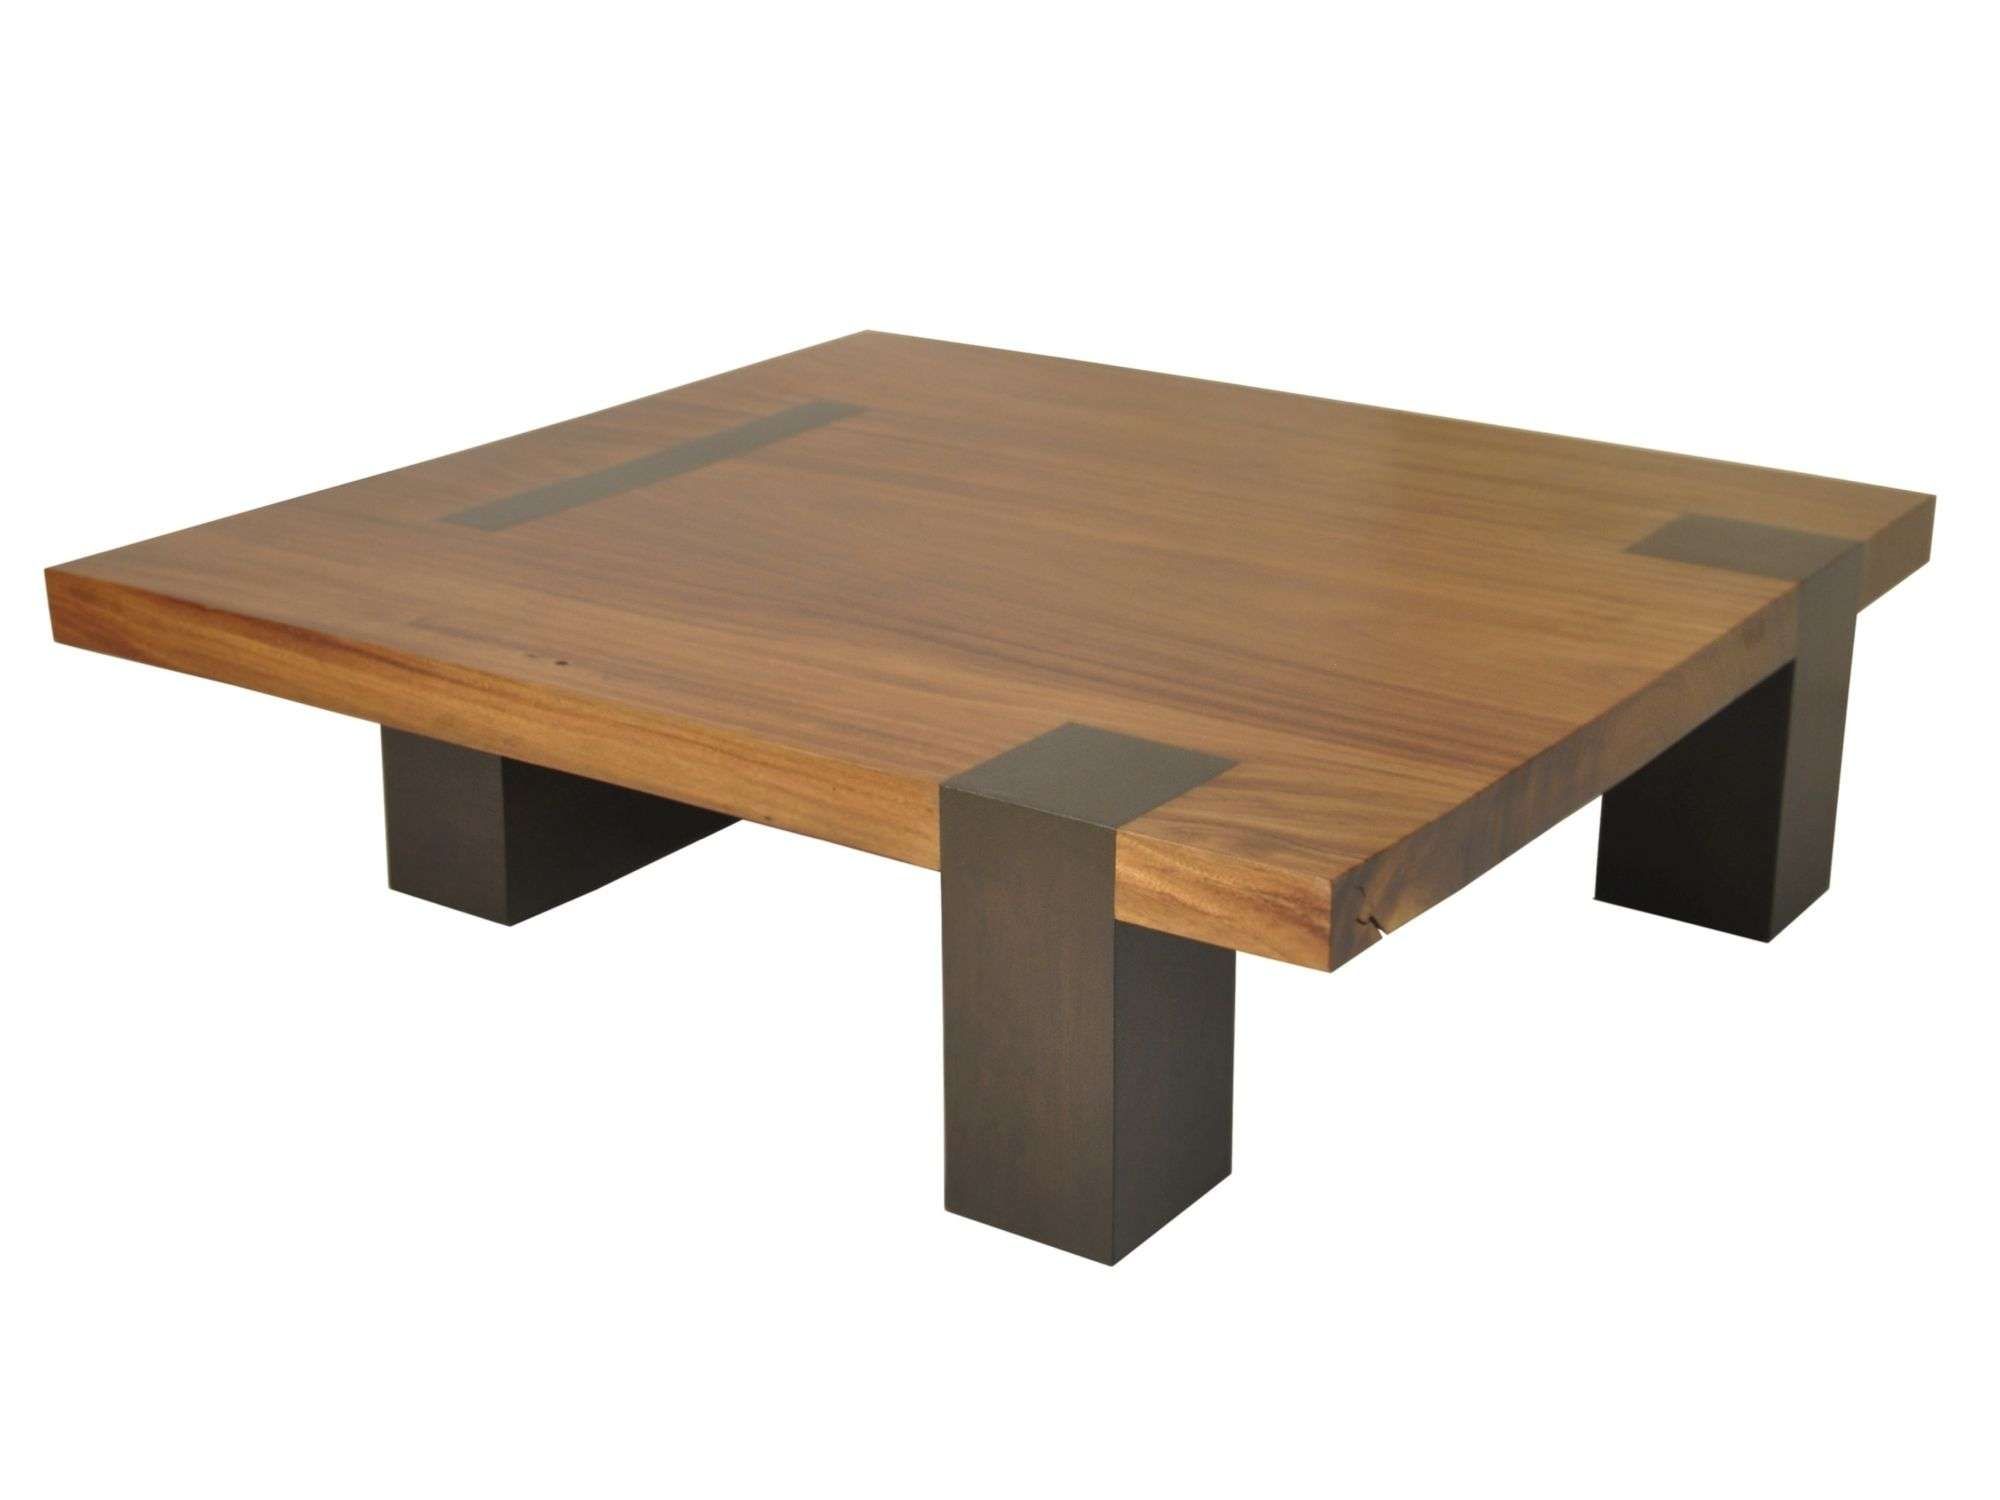 Most Recent Wood Modern Coffee Tables With Coffee Table : Modern Wood Coffeee Darkes Contemporary New Light (View 6 of 20)